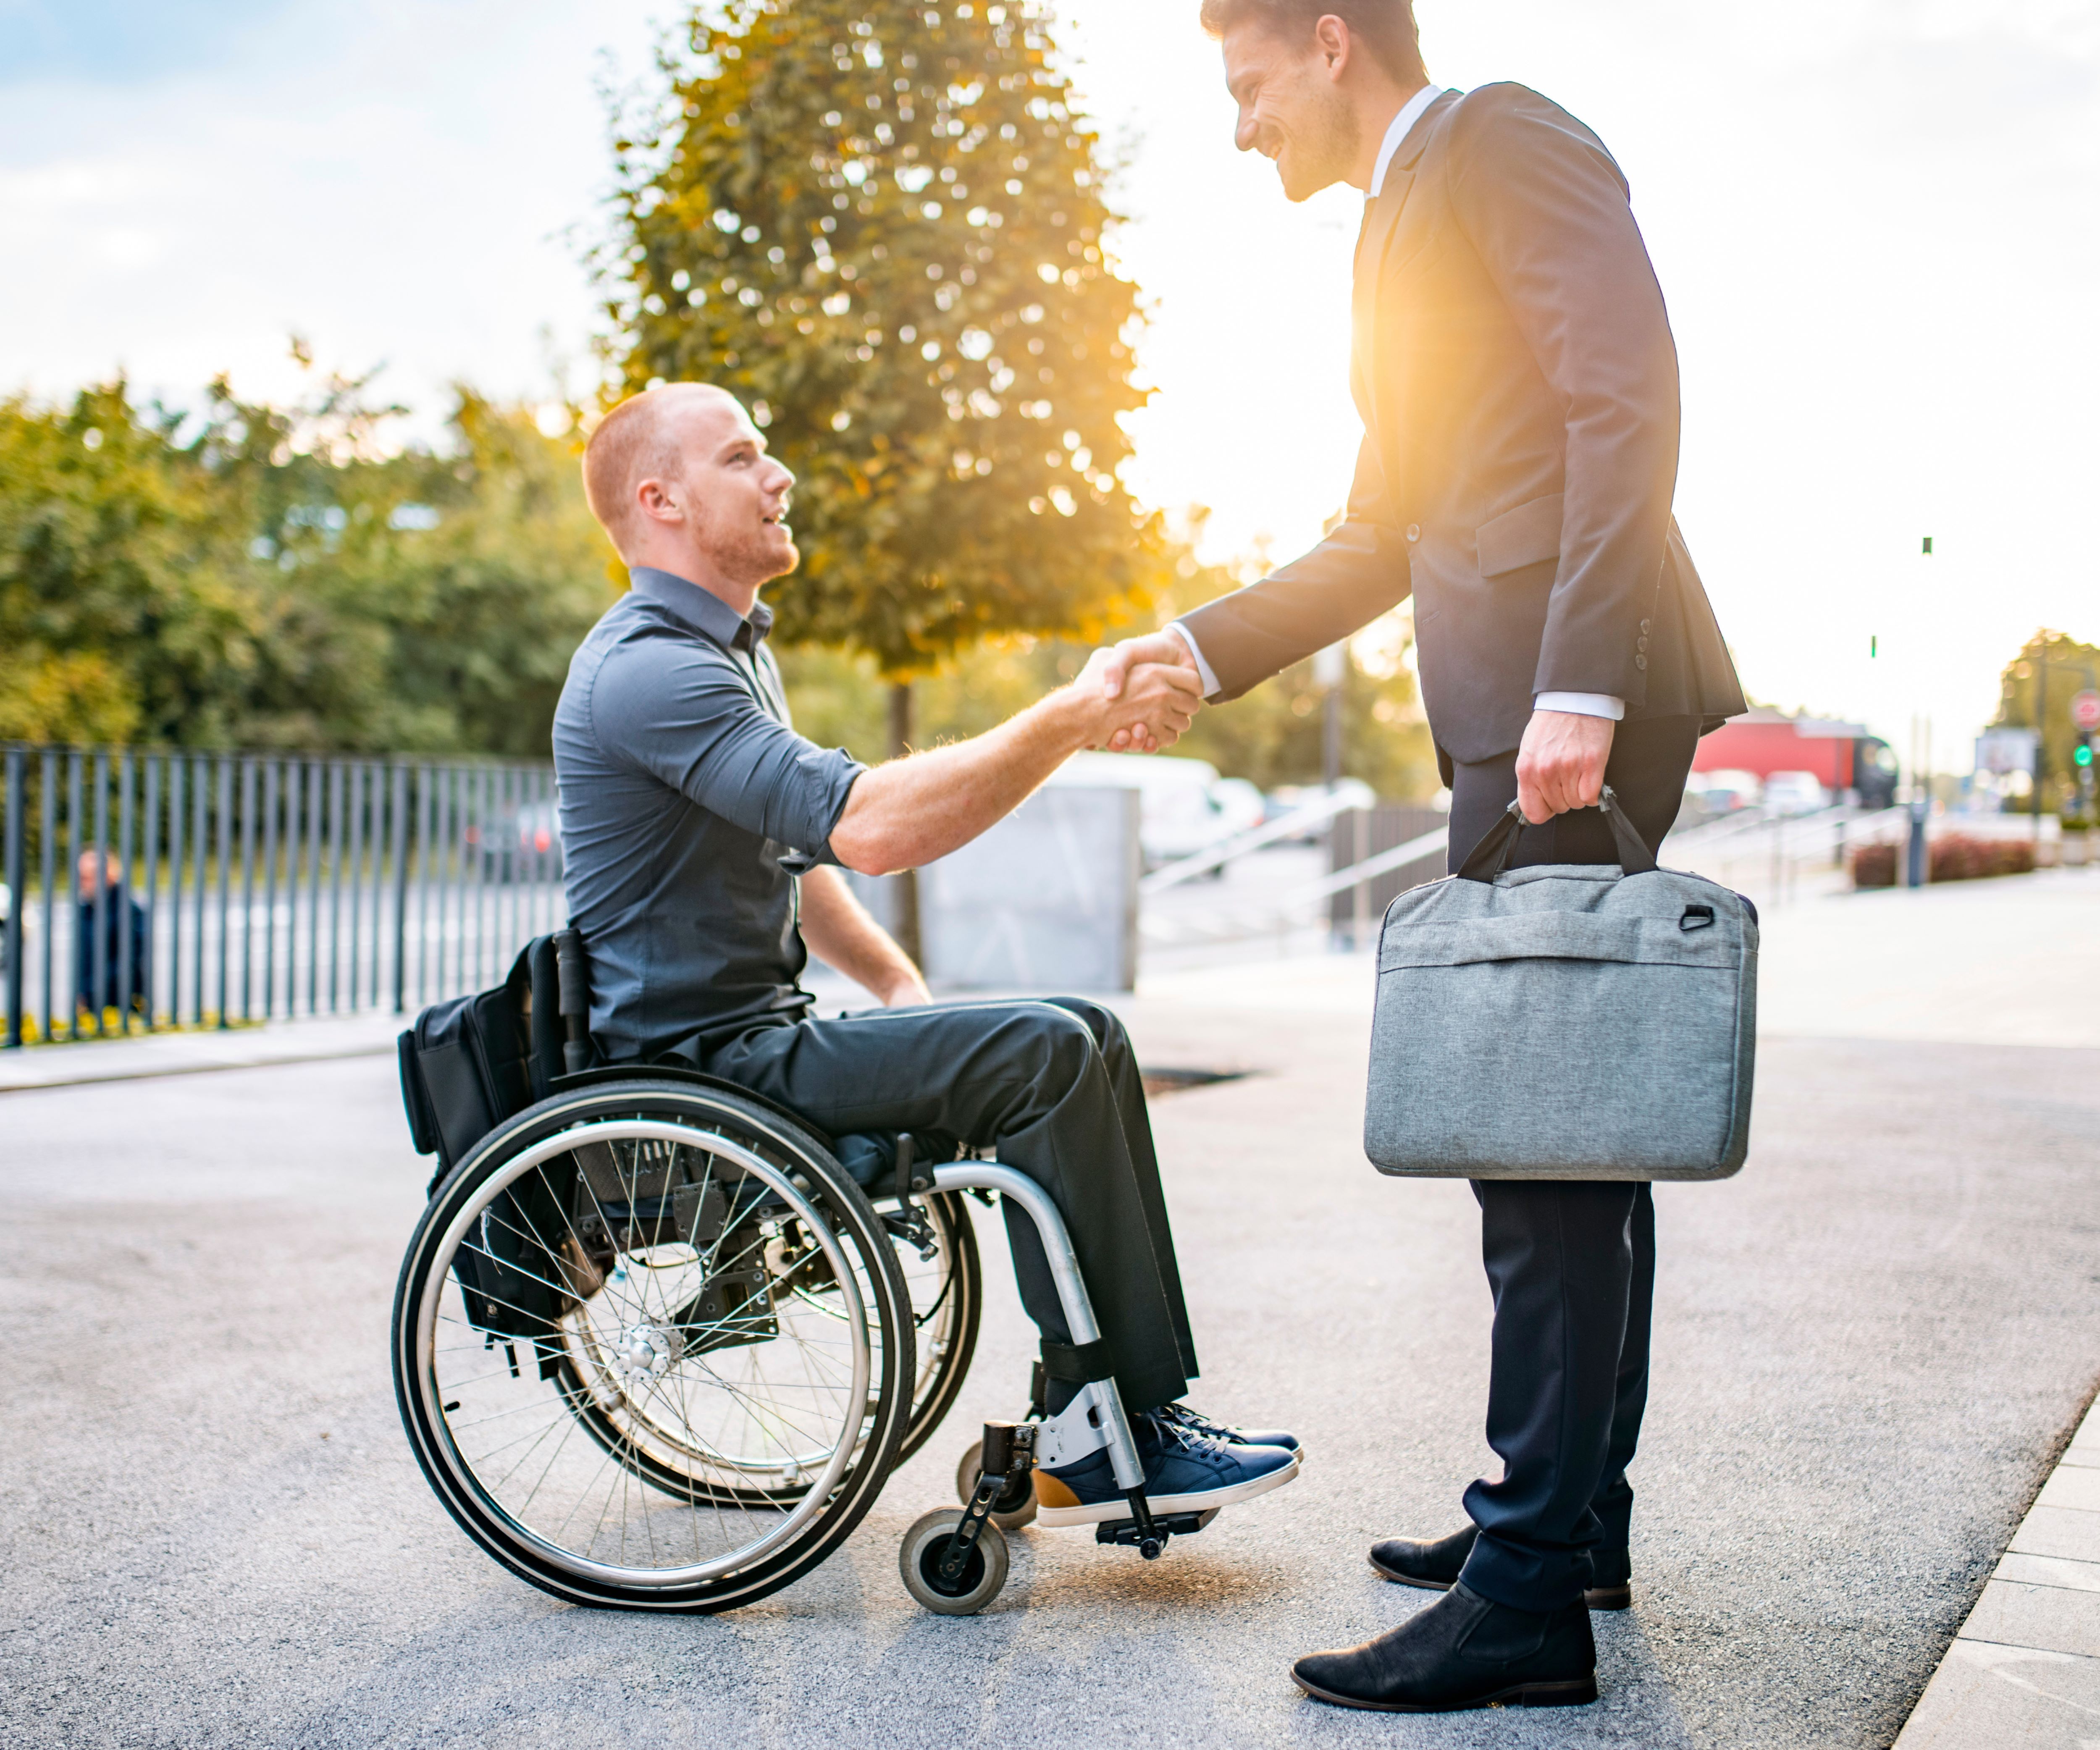 A student in a wheelchair shakes the hand of a standing man in a suit holding a briefcase